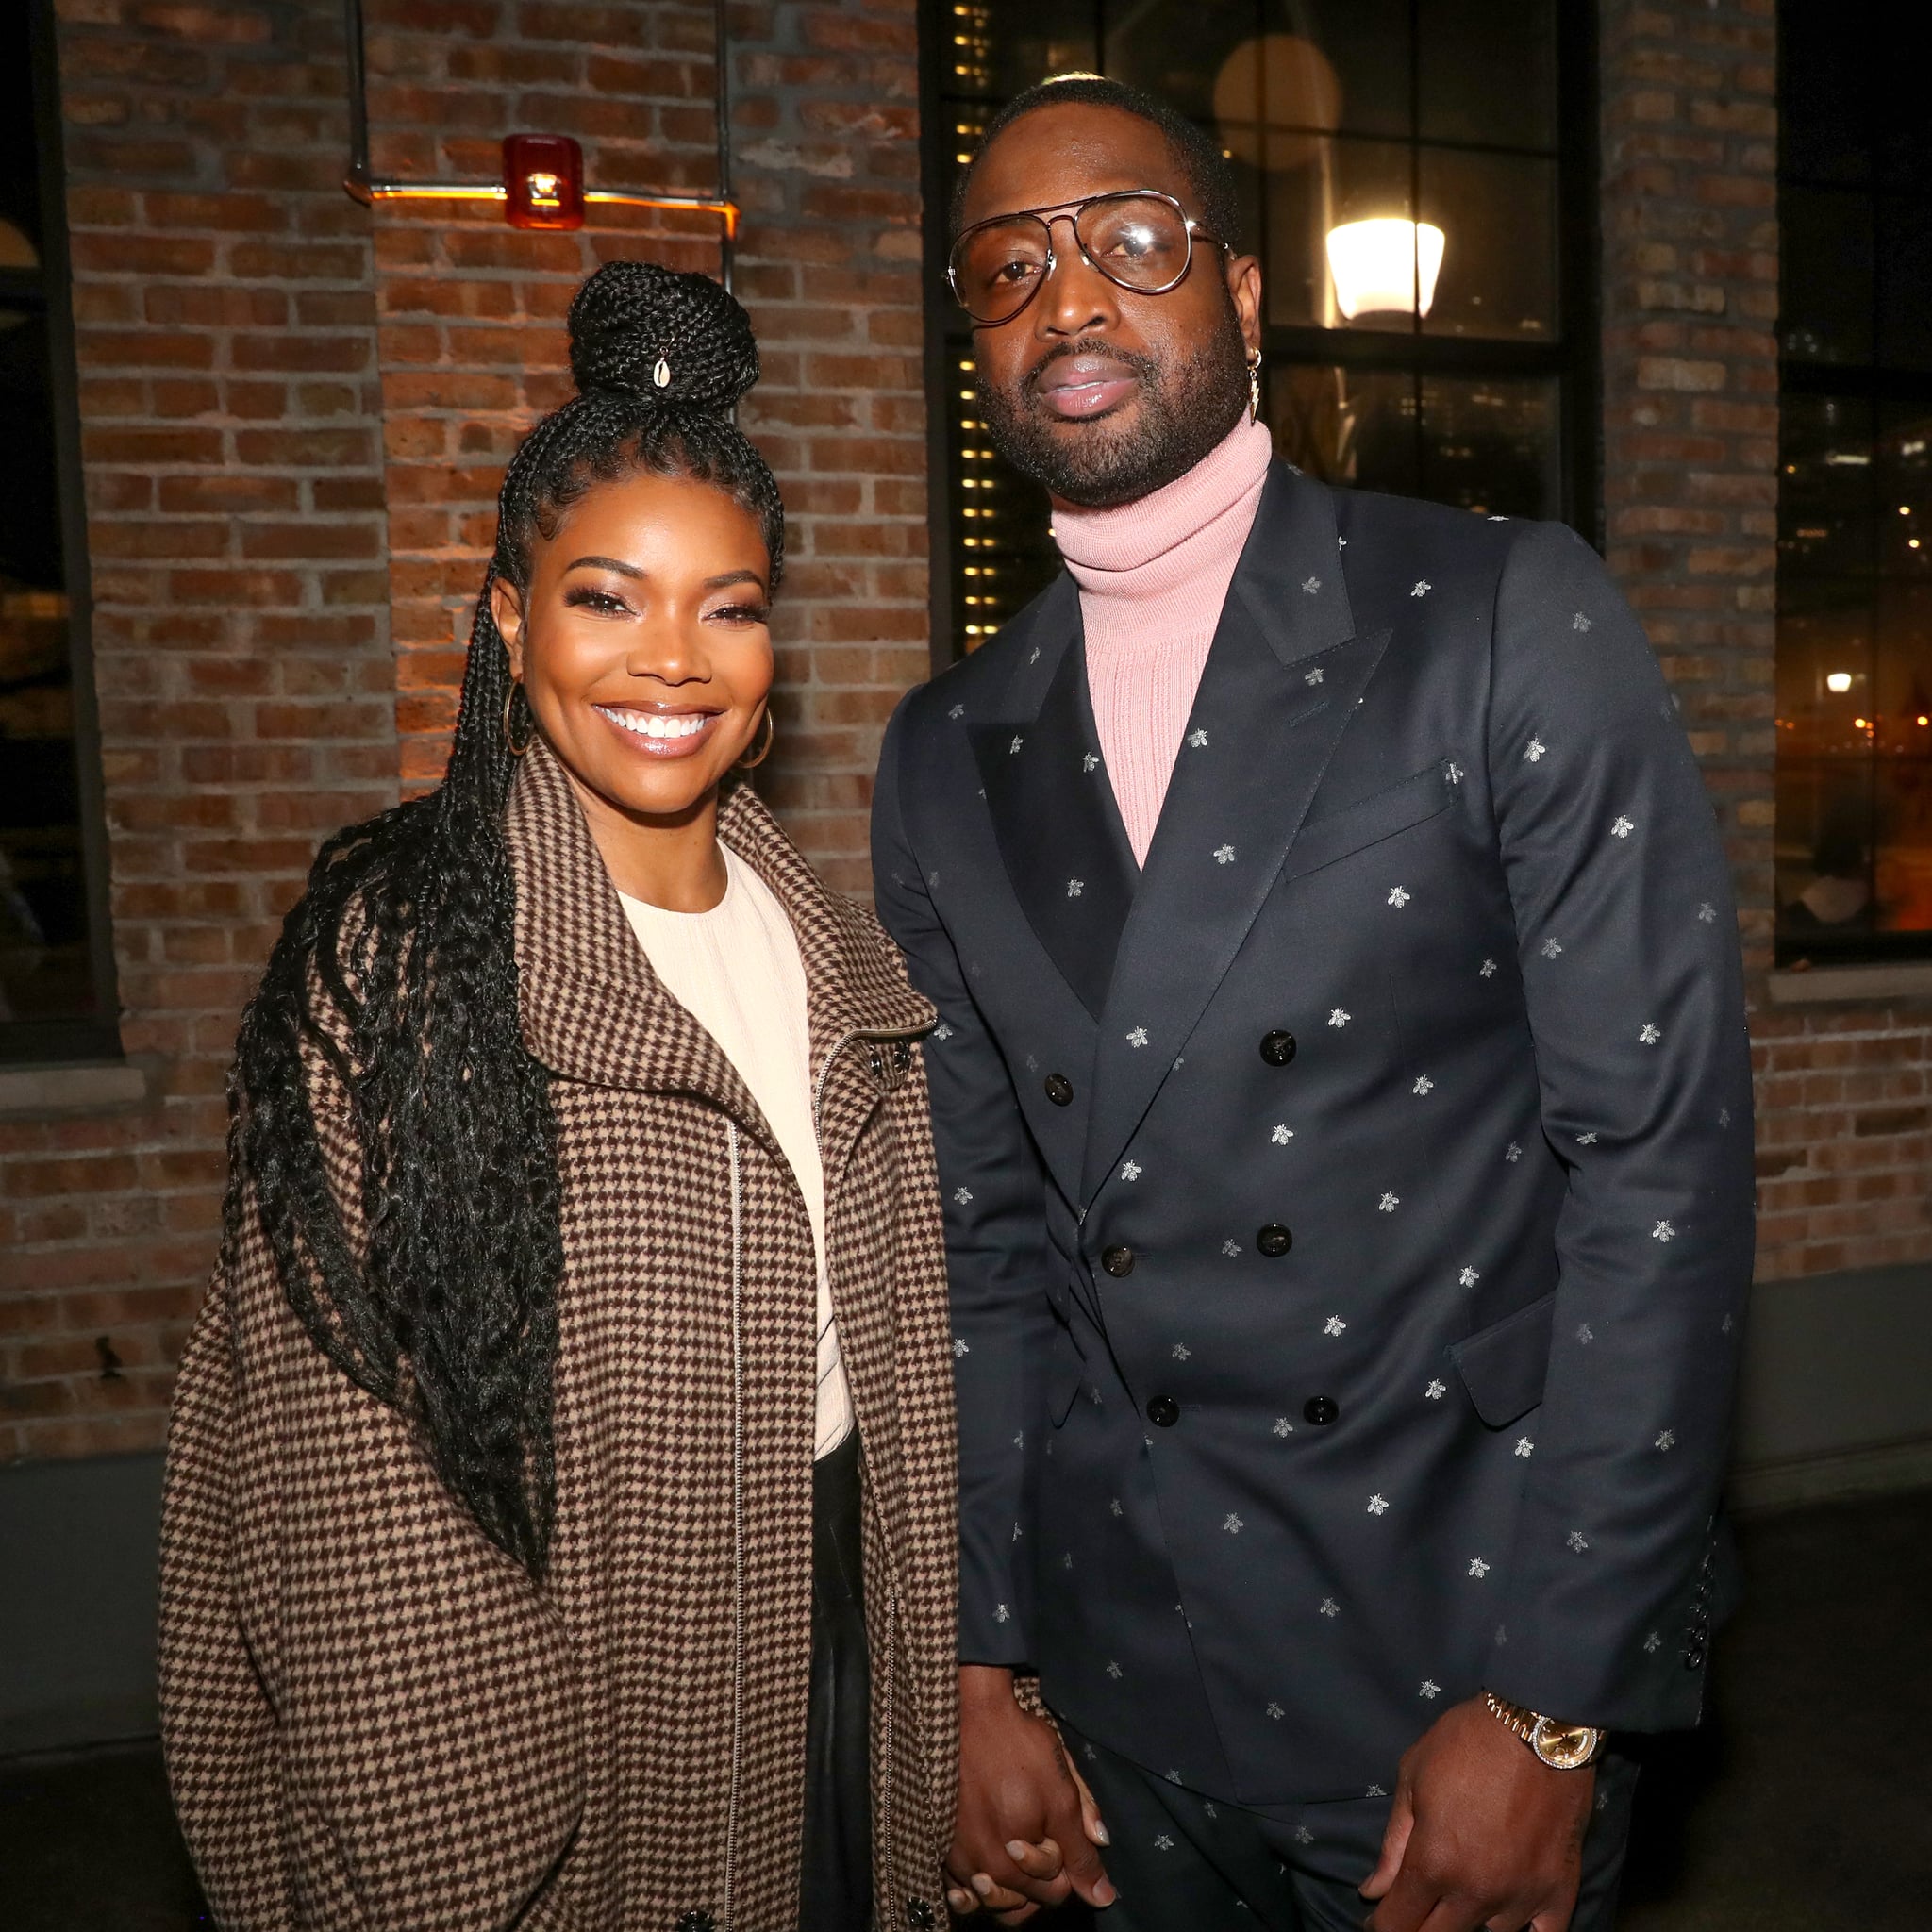 CHICAGO, ILLINOIS - FEBRUARY 15: Gabrielle Union and Dwyane Wade attend Stance Spades At NBA All-Star 2020 at City Hall on February 15, 2020 in Chicago, Illinois. (Photo by Johnny Nunez/Getty Images for Stance)